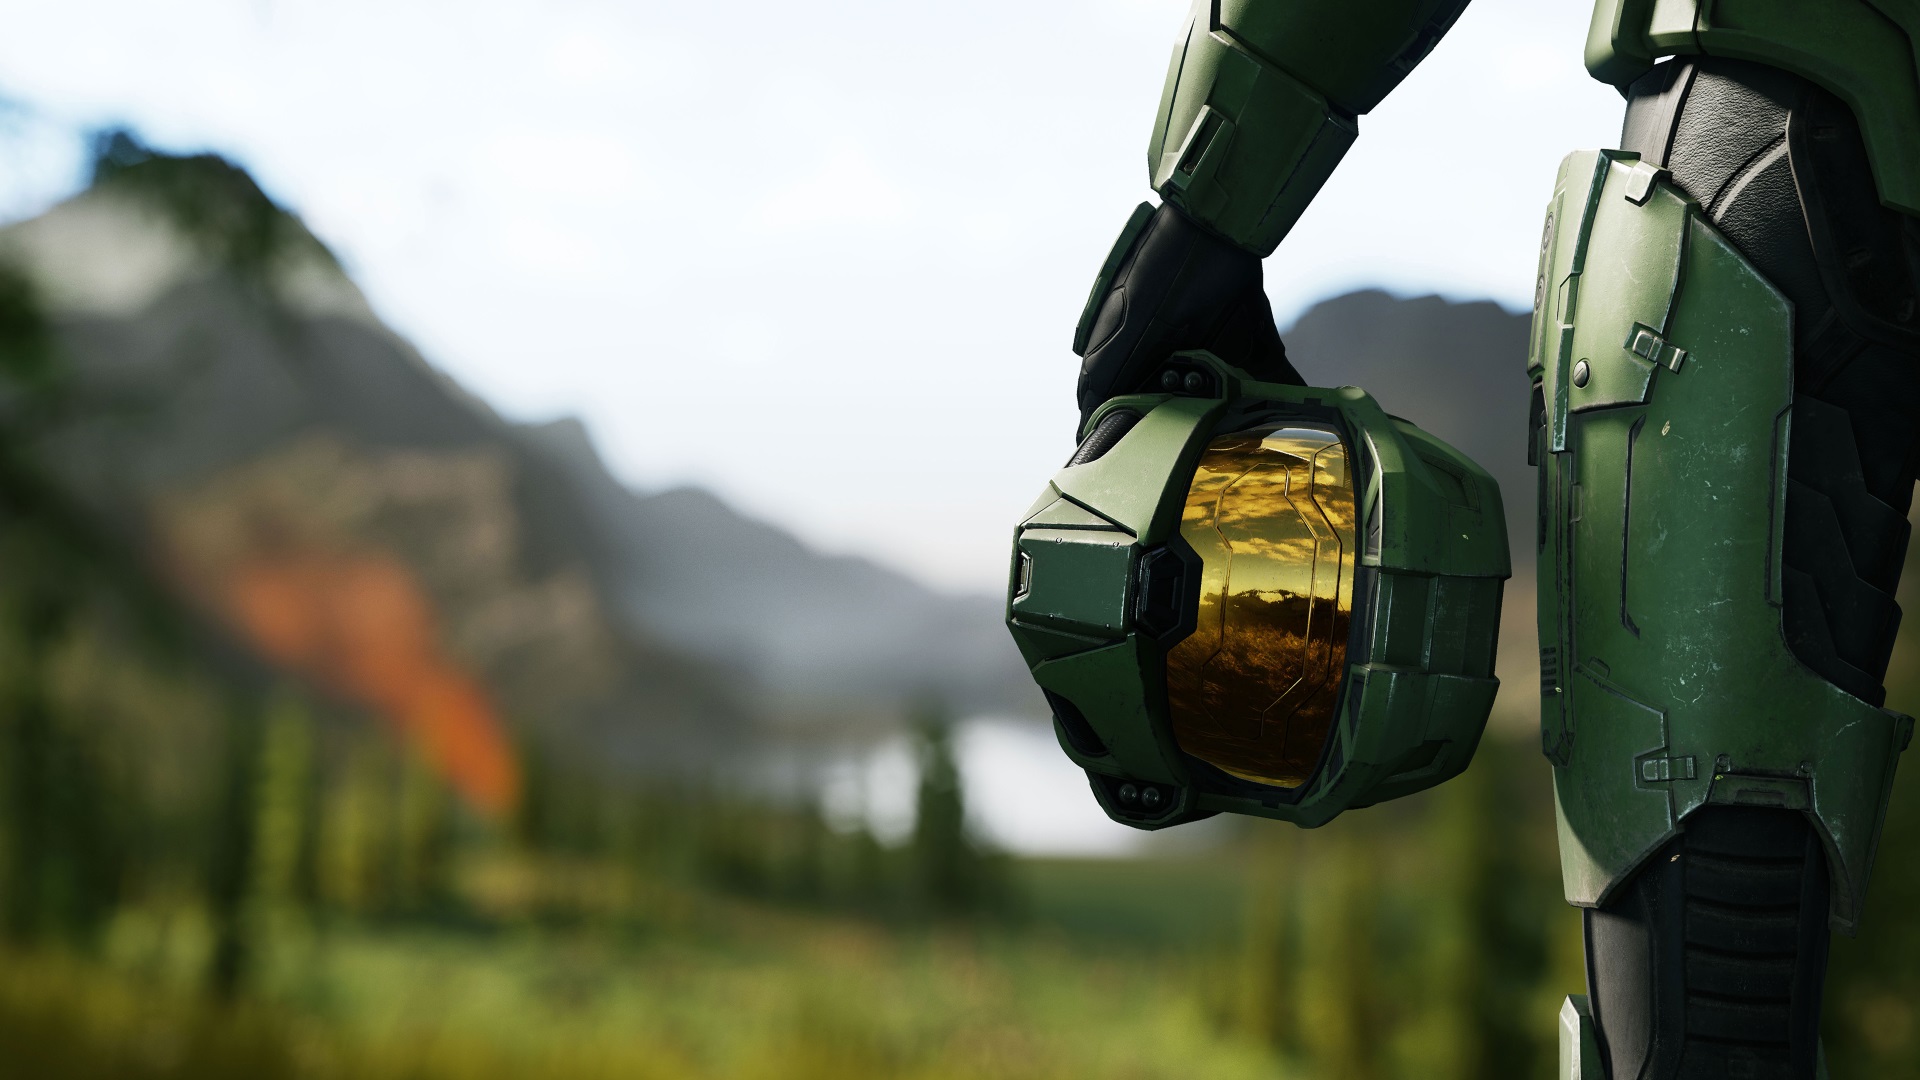 Will There Be A Halo Season 2? The Master Chief Saga Continues